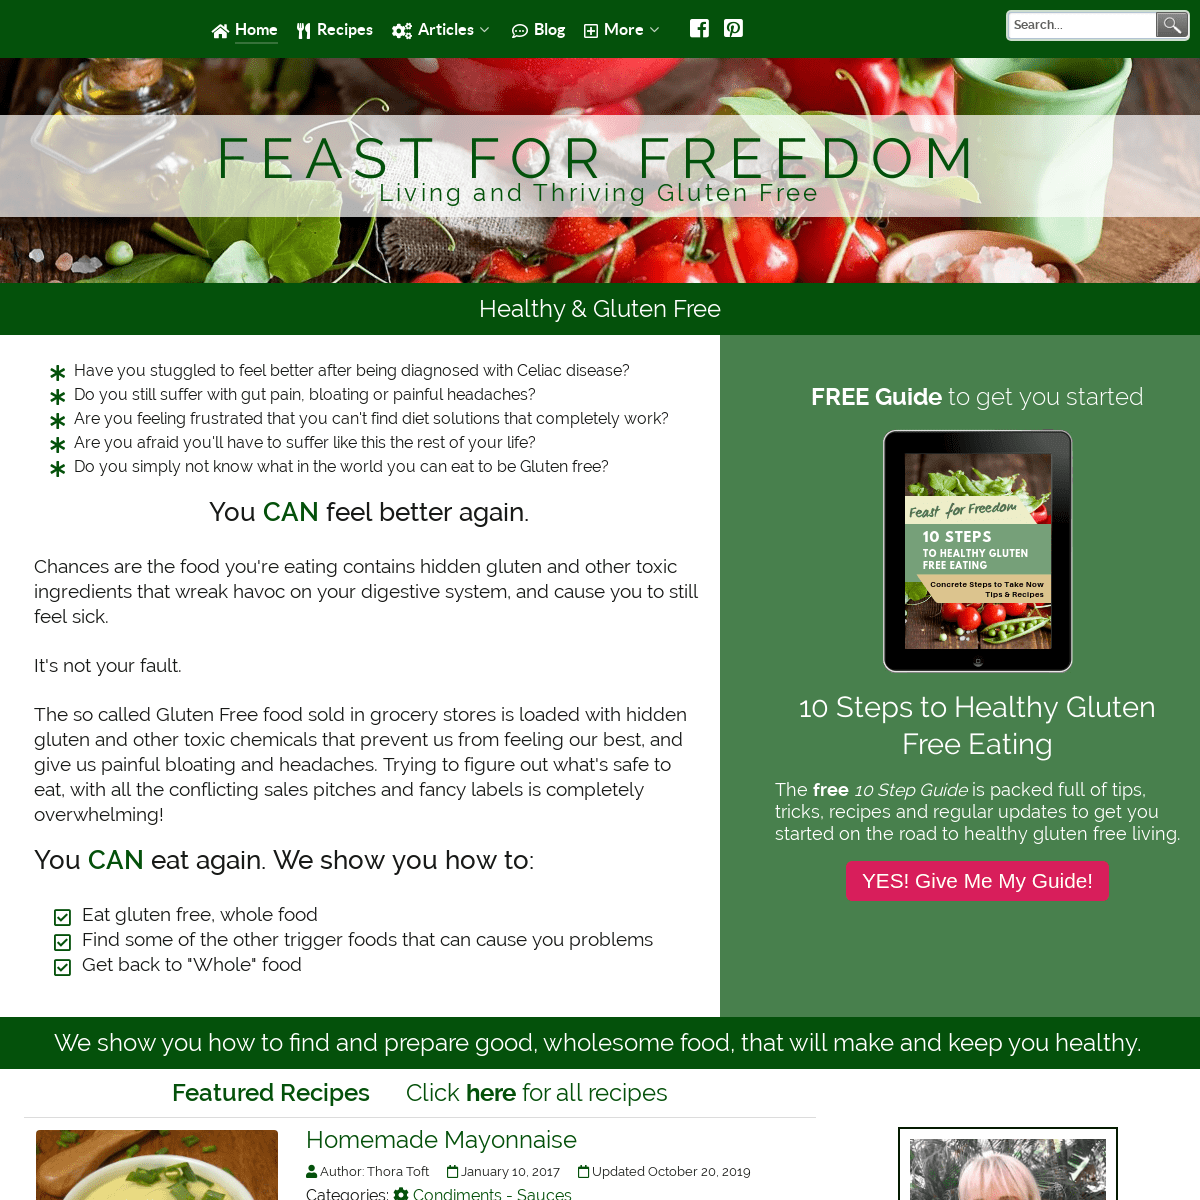 A complete backup of feastforfreedom.com